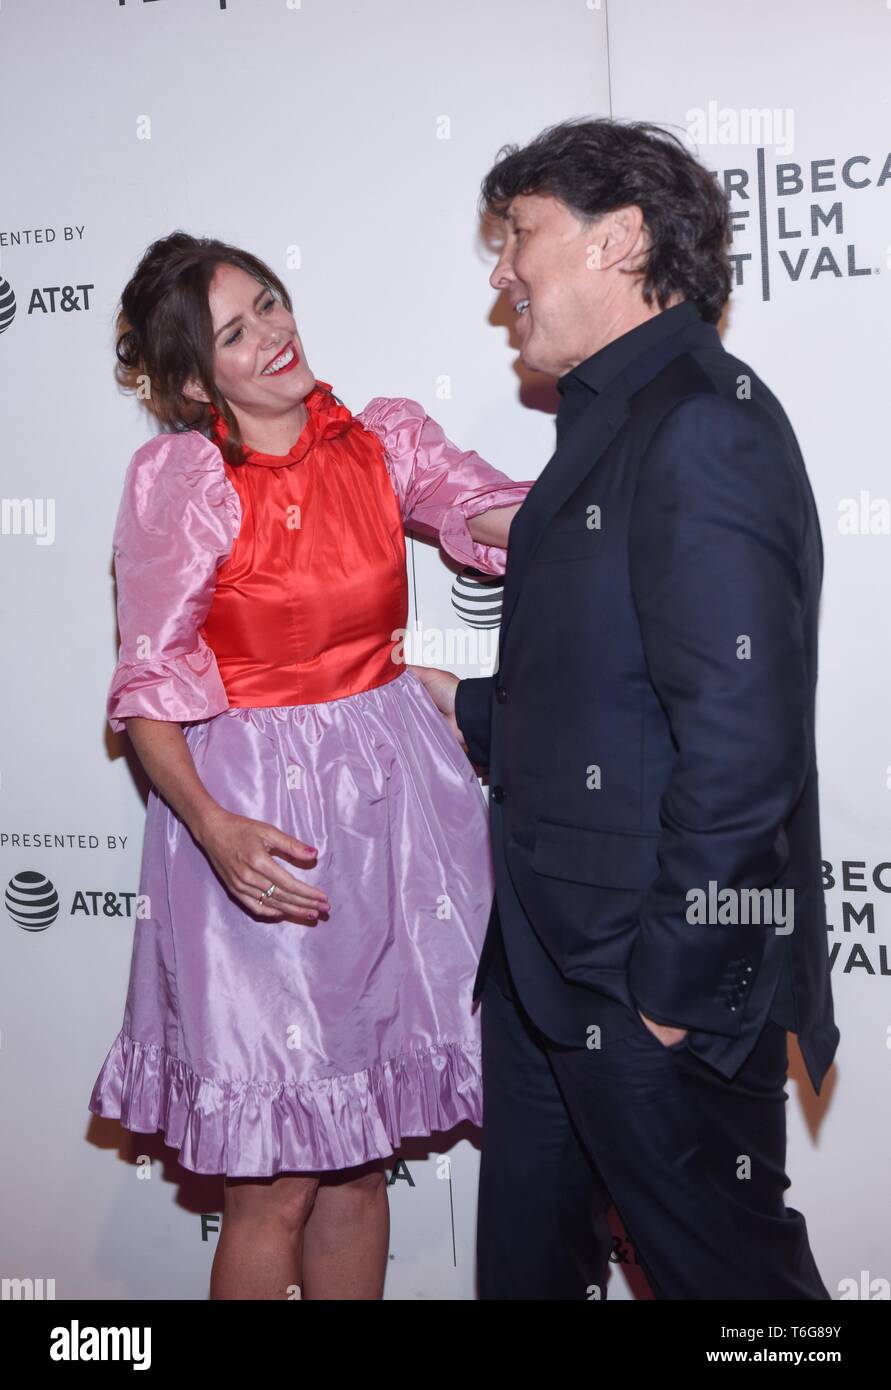 New York, New York, USA. 30th Apr, 2019. Ione Skye and Cameron Crowe attend Say Anything 30 year anniversary during the 2019 Tribeca Film Festival at The Stella Artois Theatre Credit: Bmcc Tpac On April 30, 2019 In New York City. Photo: Jeremy Smith/Image Space/Media Punch/Alamy Live News Stock Photo